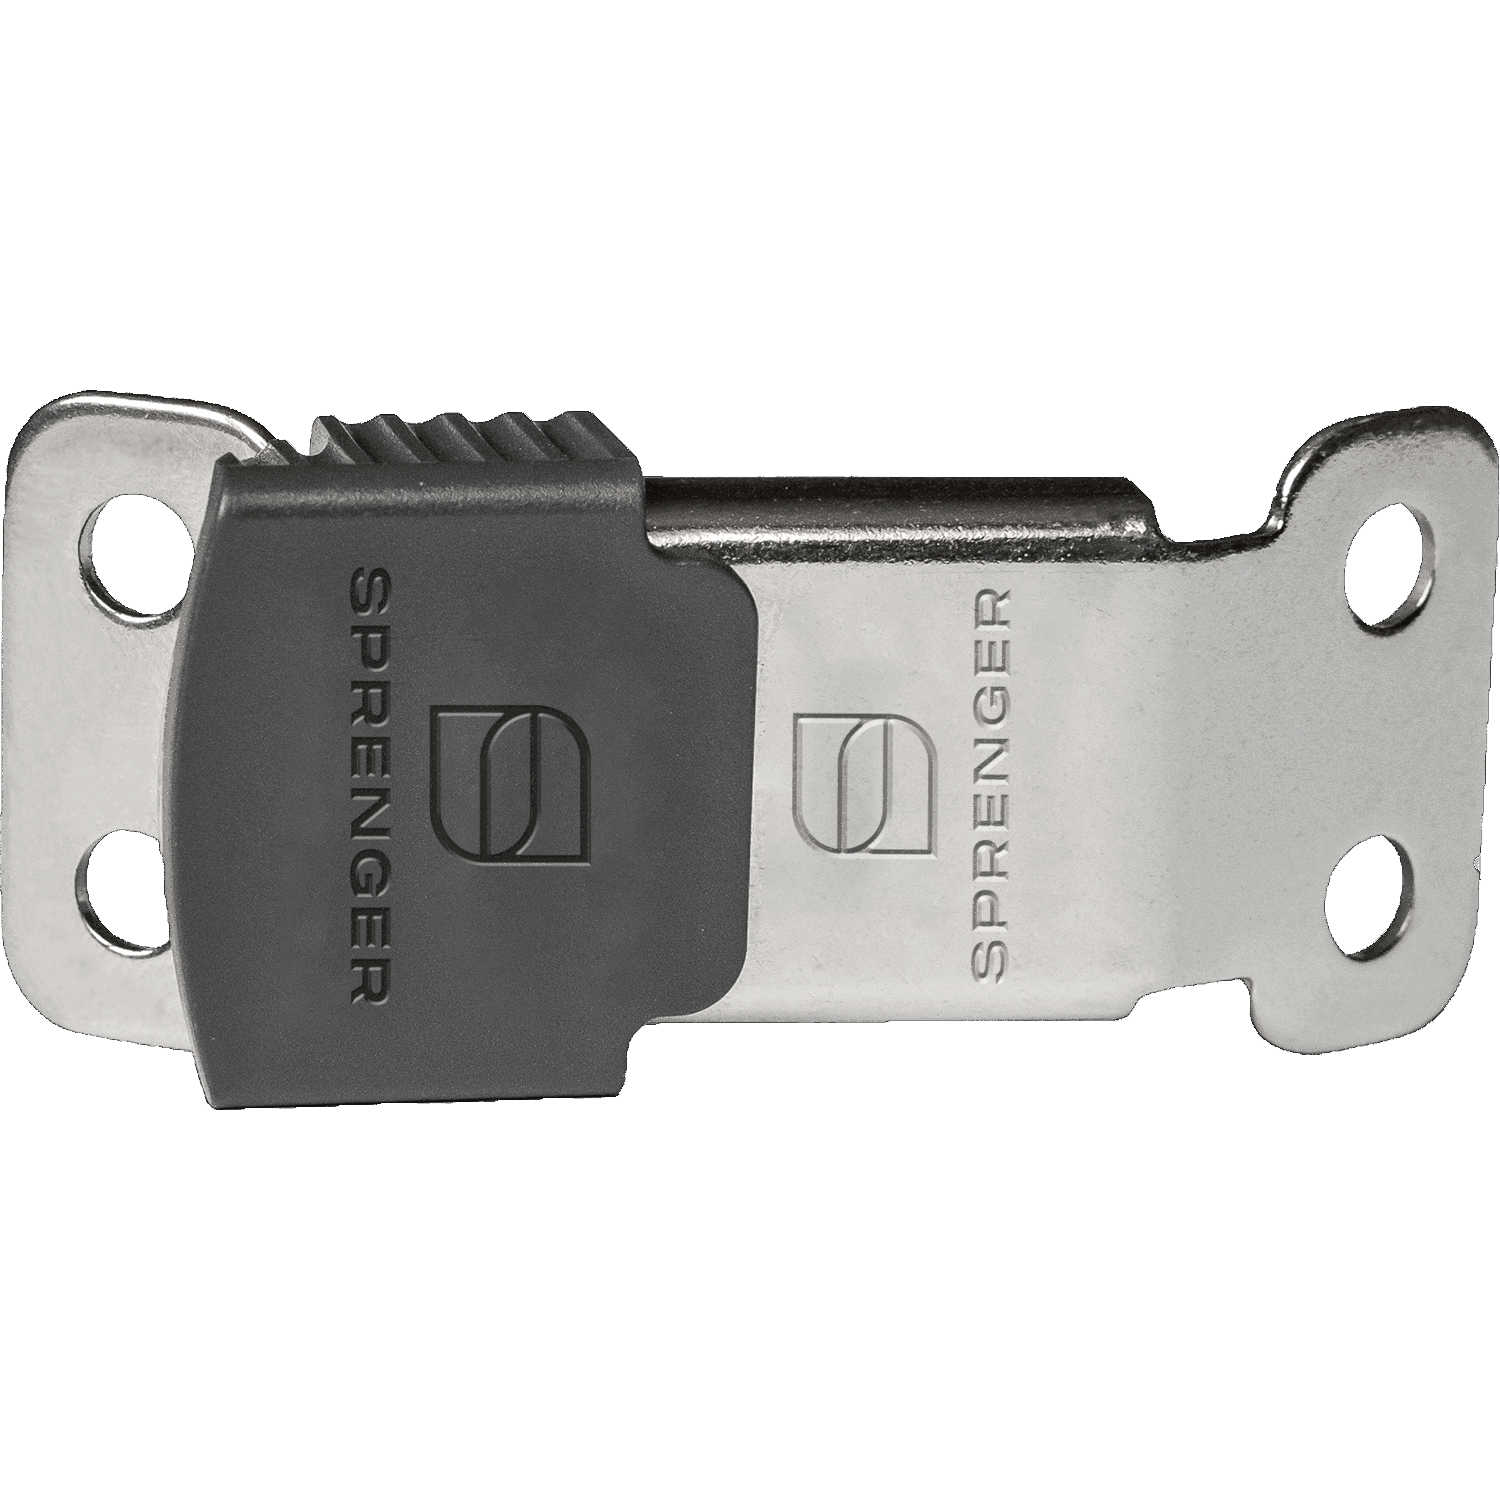 The Stainless Steel ClicLock - for use with Prong Collars